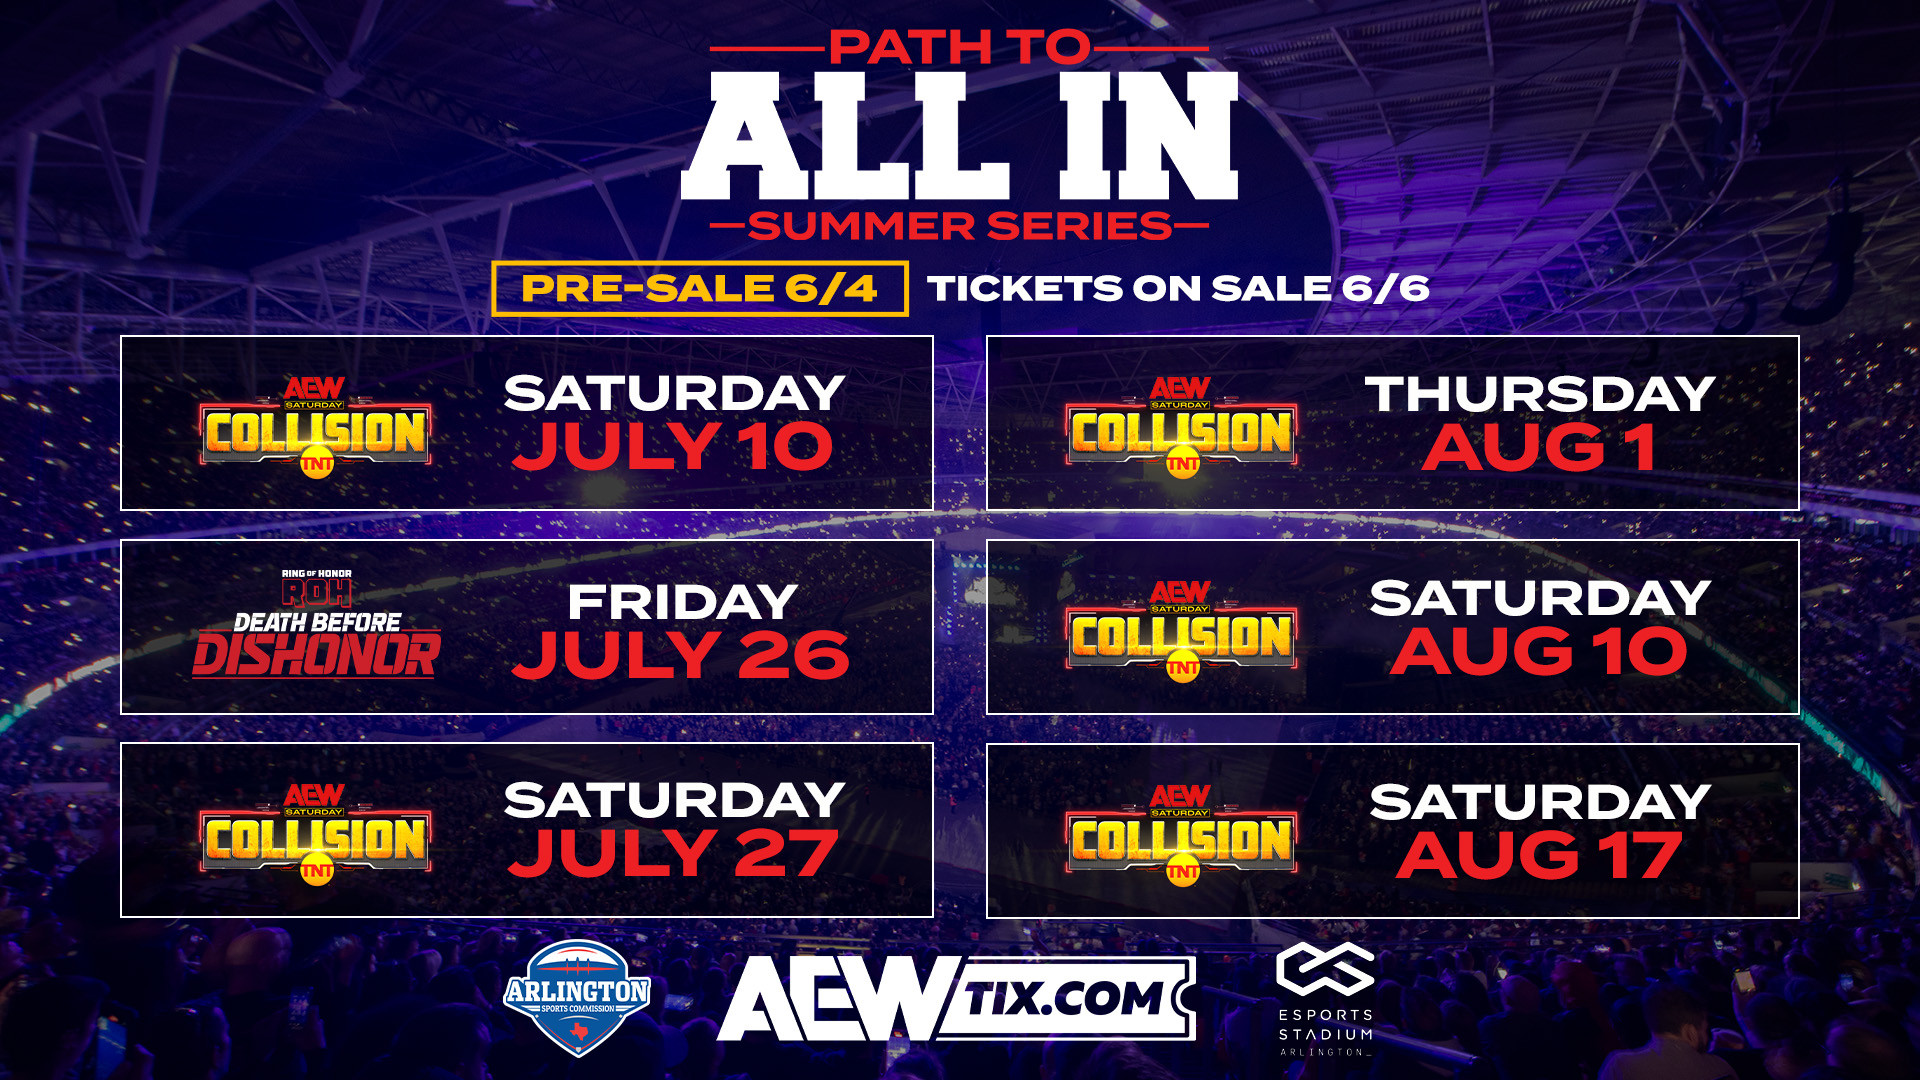 AEW Partners With City of Arlington For AEW Path To All In Summer Series